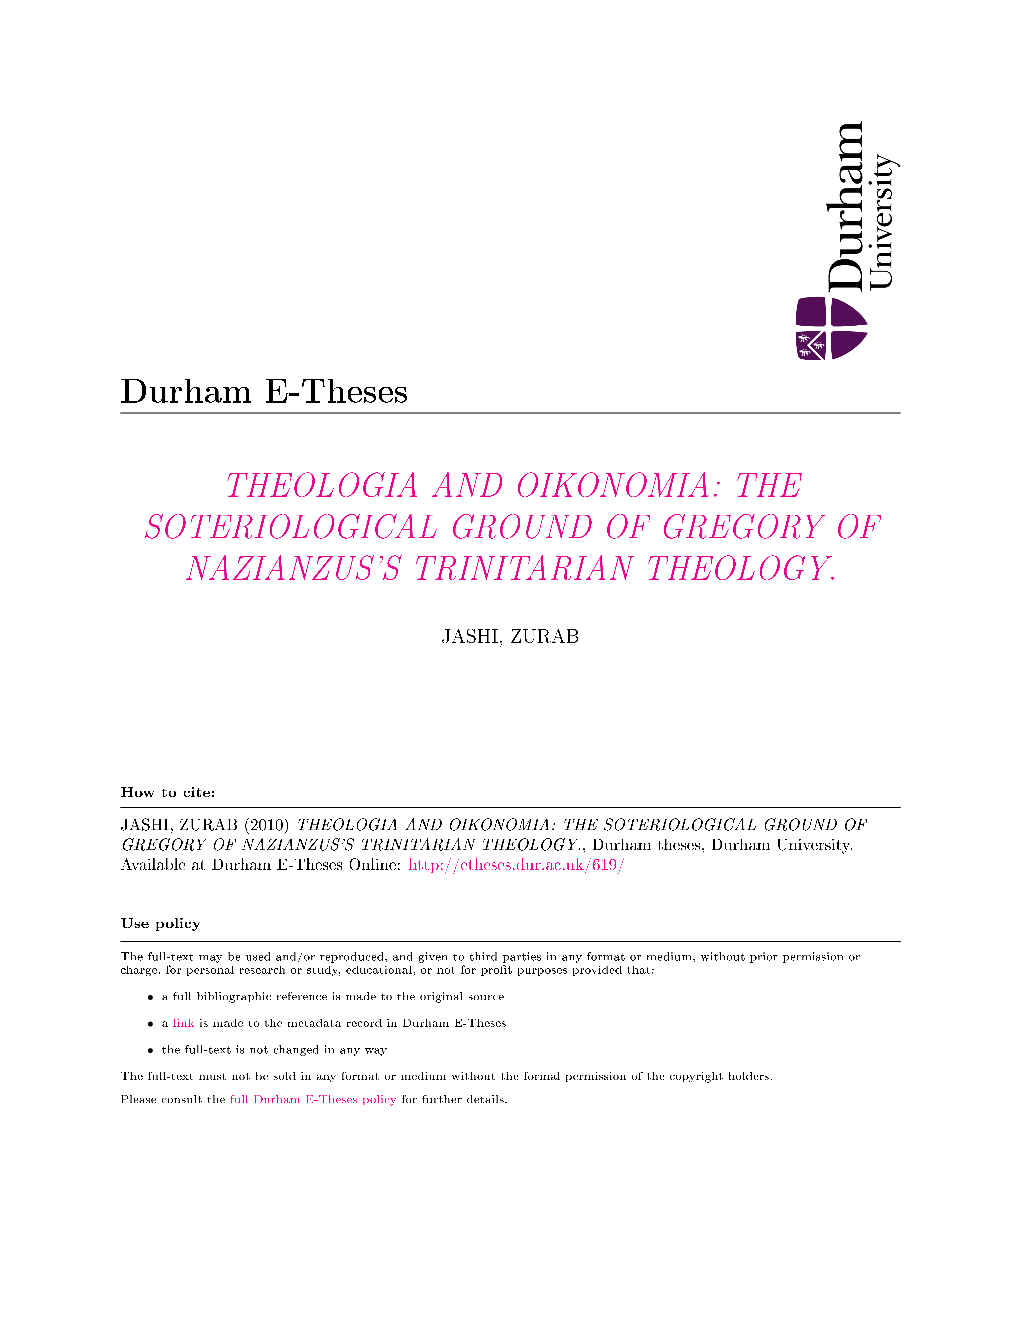 Theologia and Oikonomia: the Soteriological Ground of Gregory of Nazianzus's Trinitarian Theology